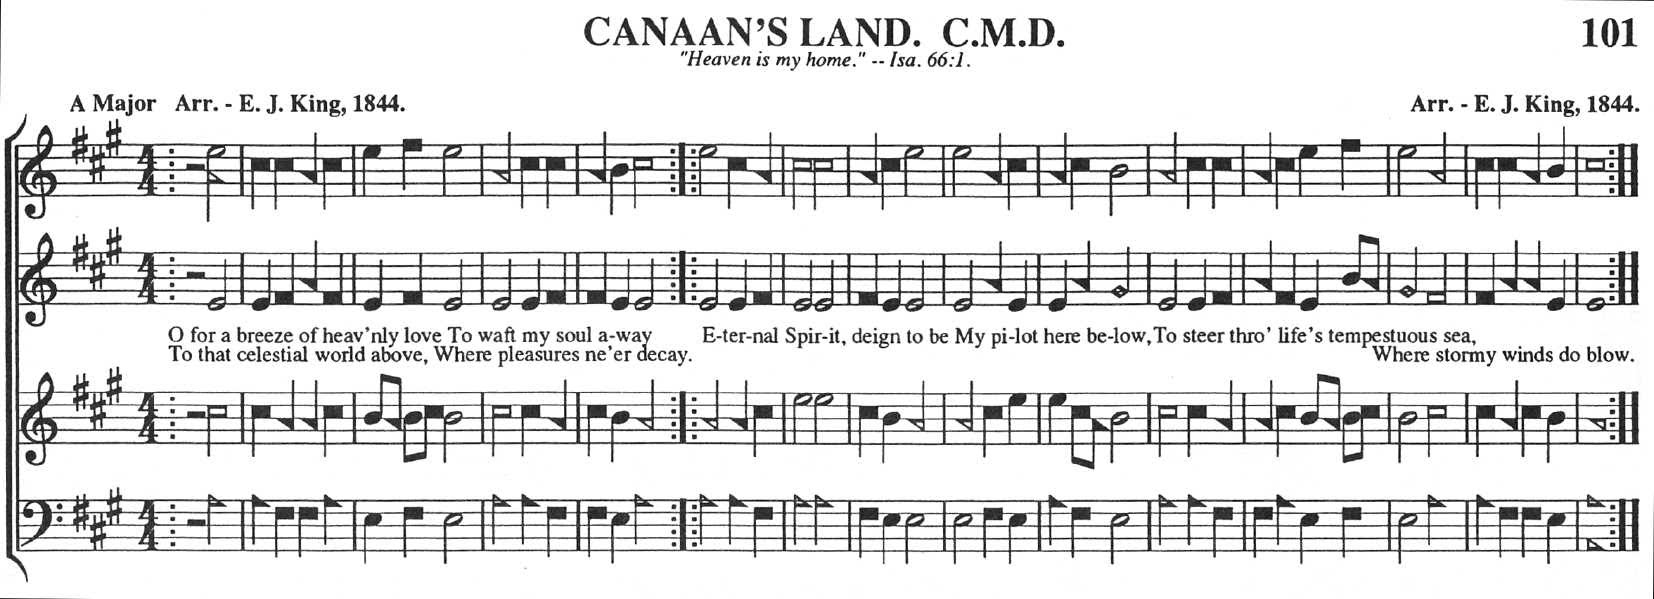 Canaan's Land tune notation